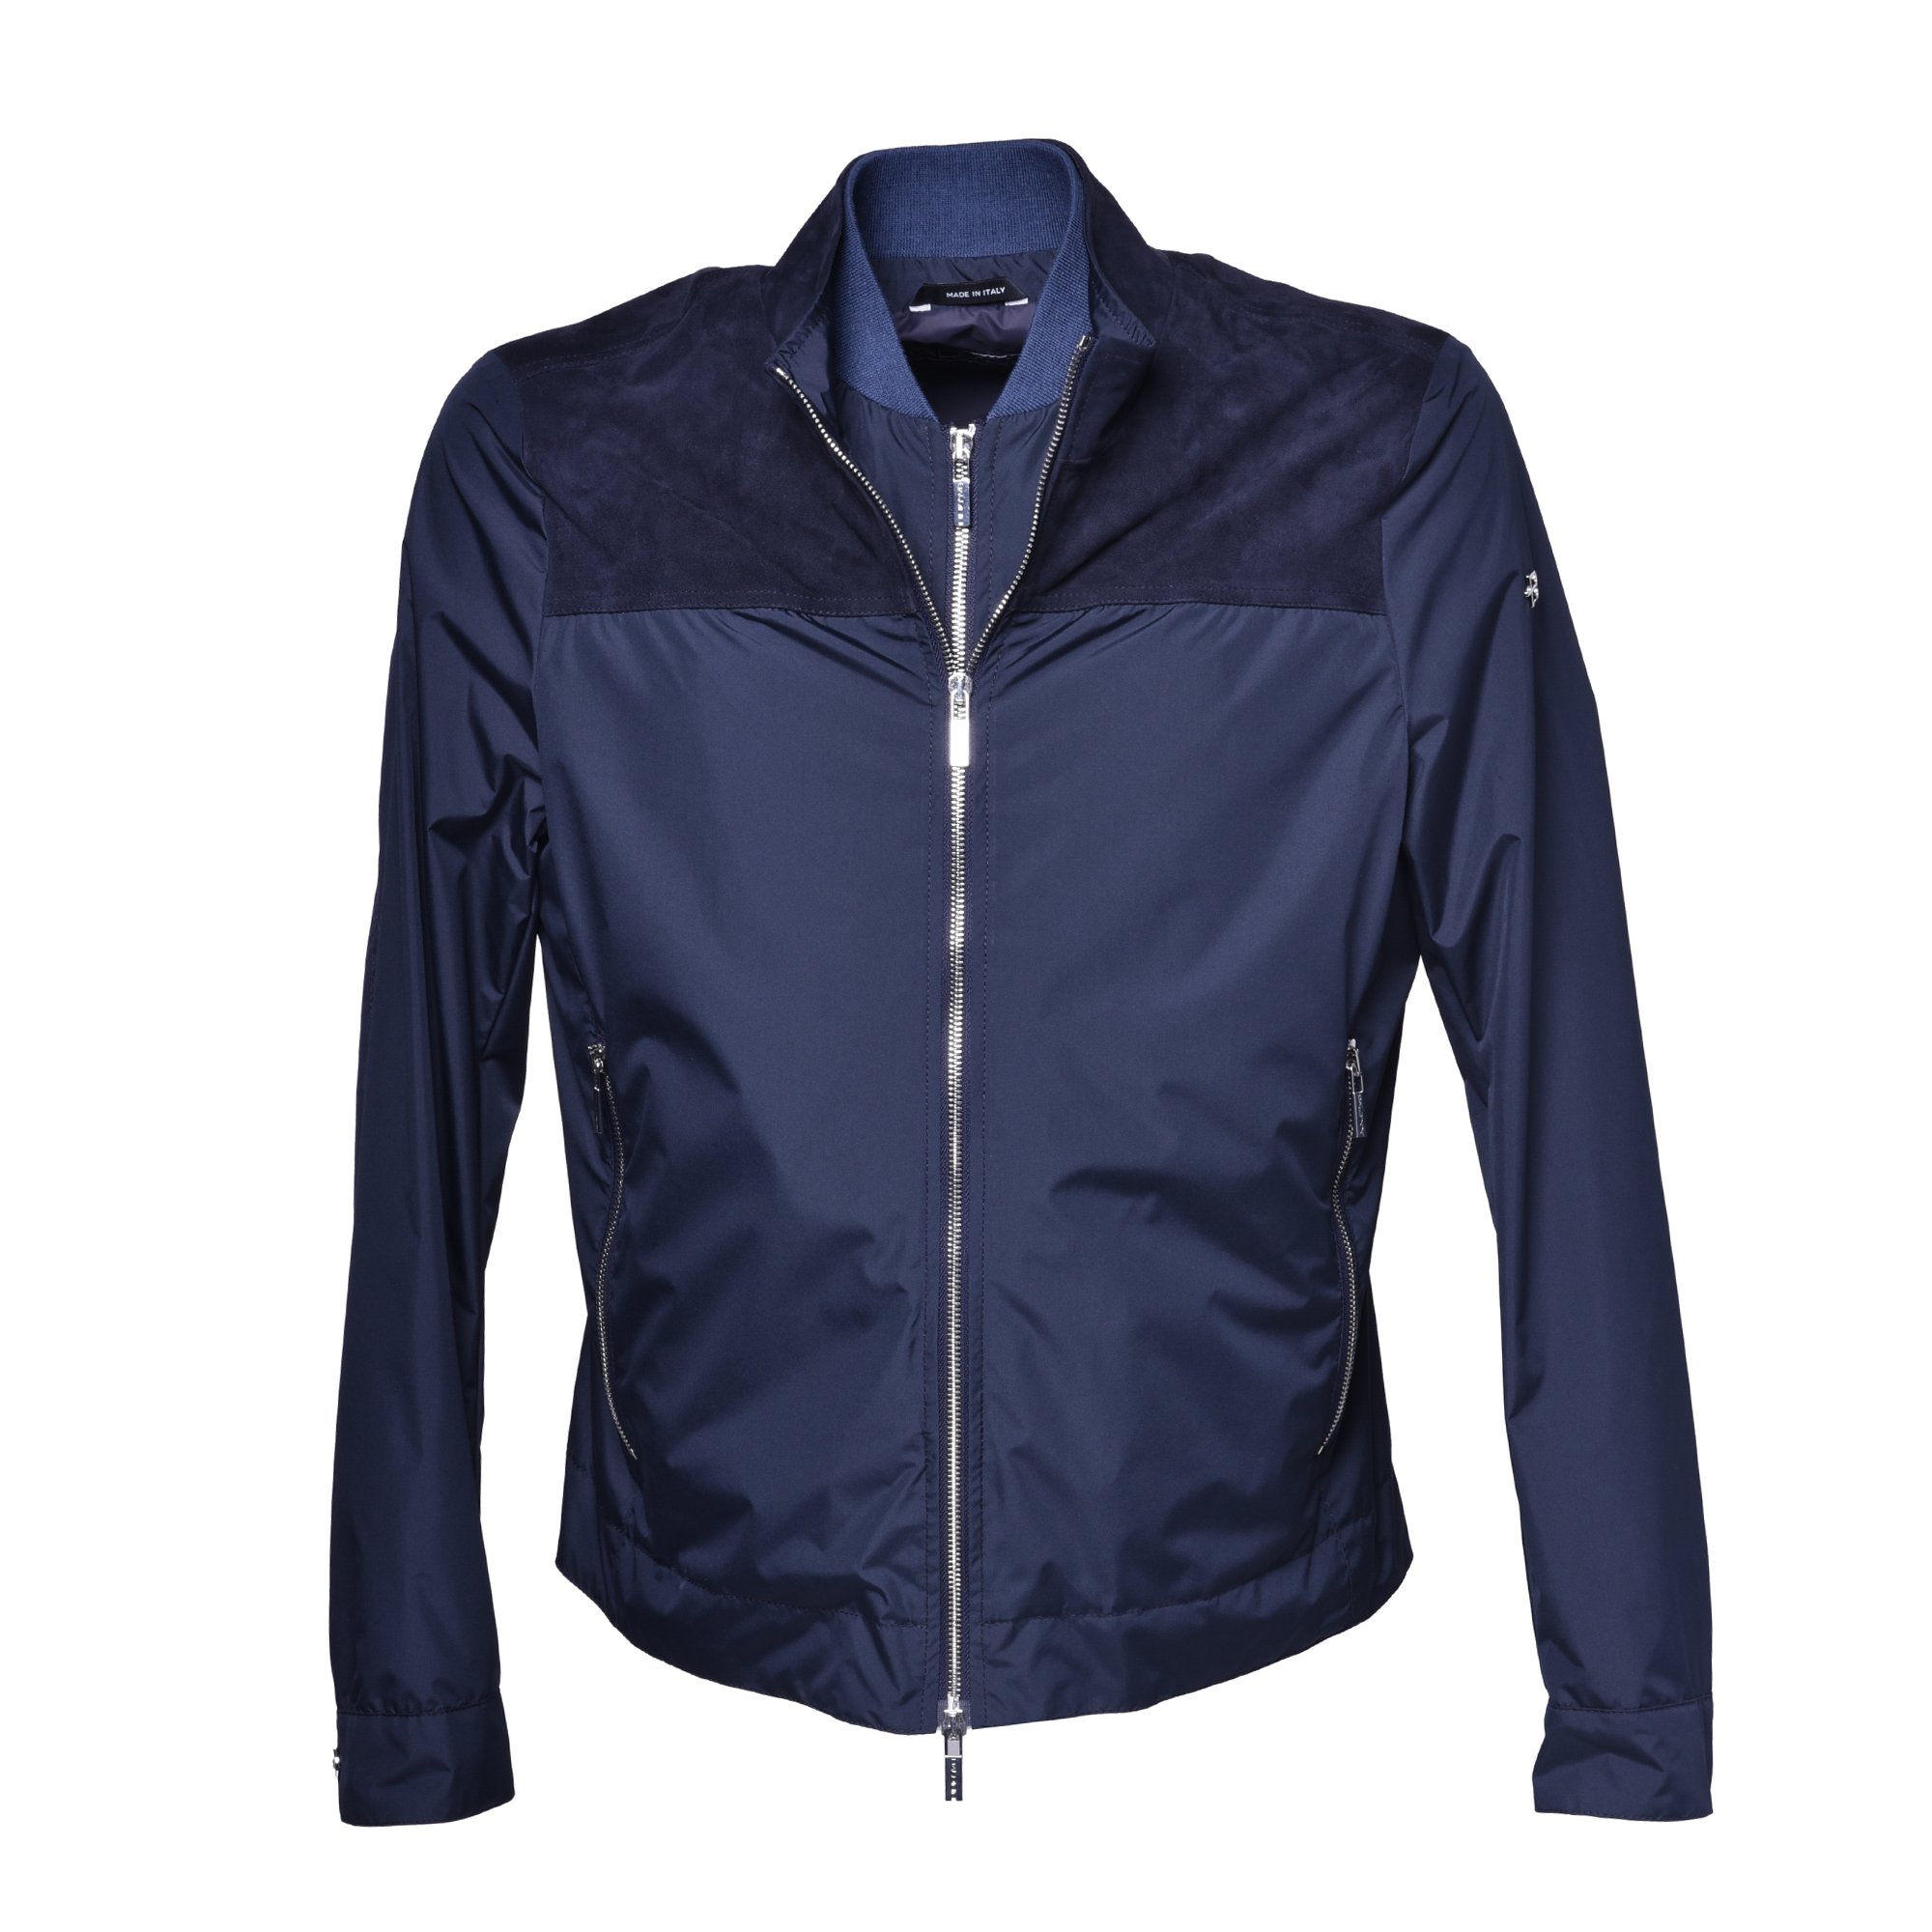 Down jacket in navy blue fabric image